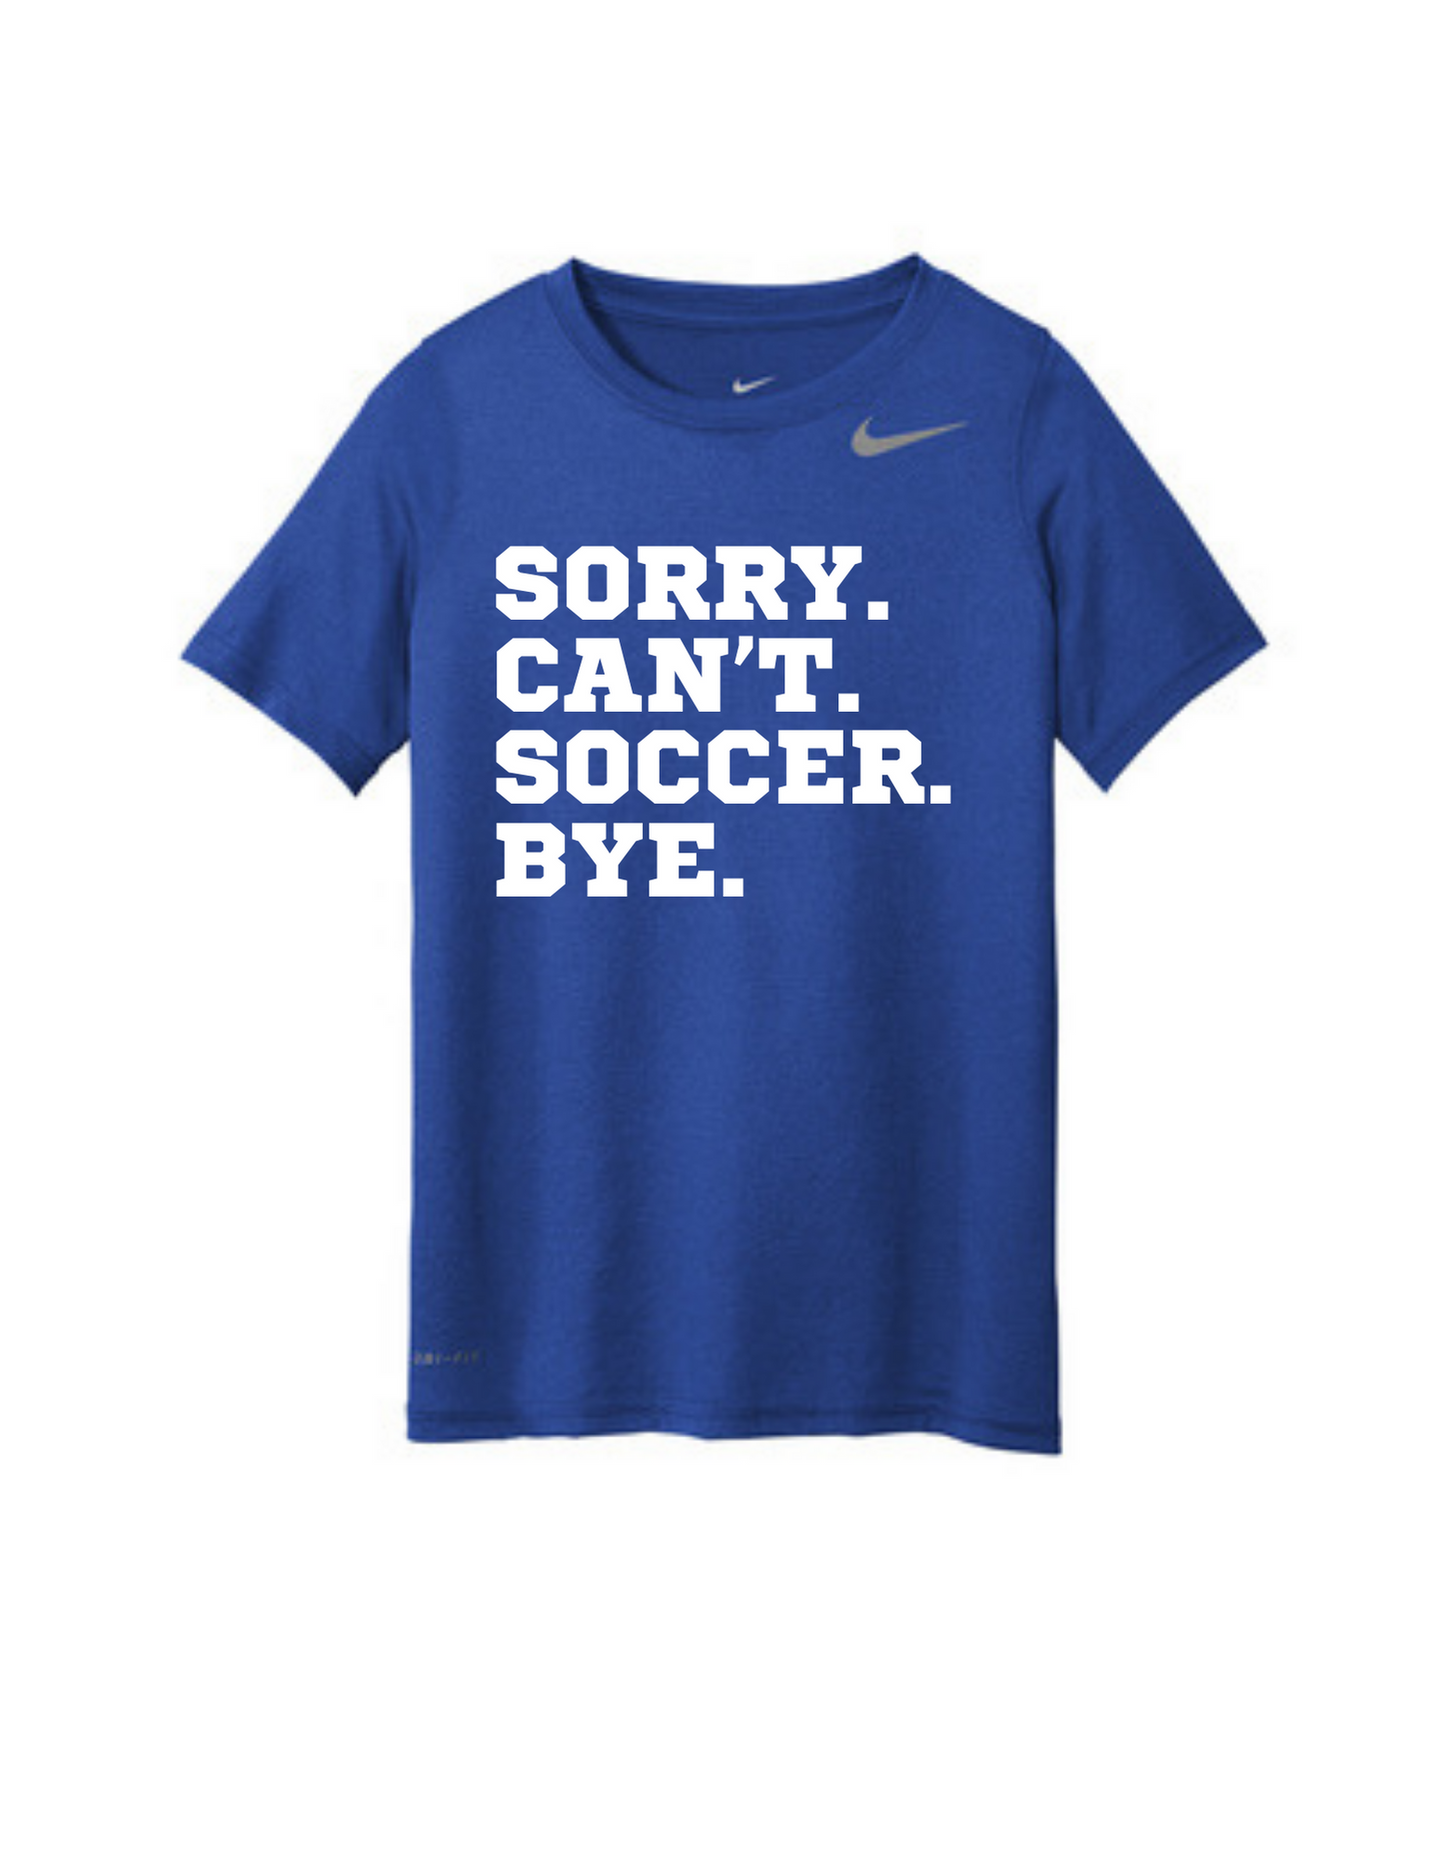 Nike Premier Youth Shirt - Sorry. Can't. Soccer. Bye.